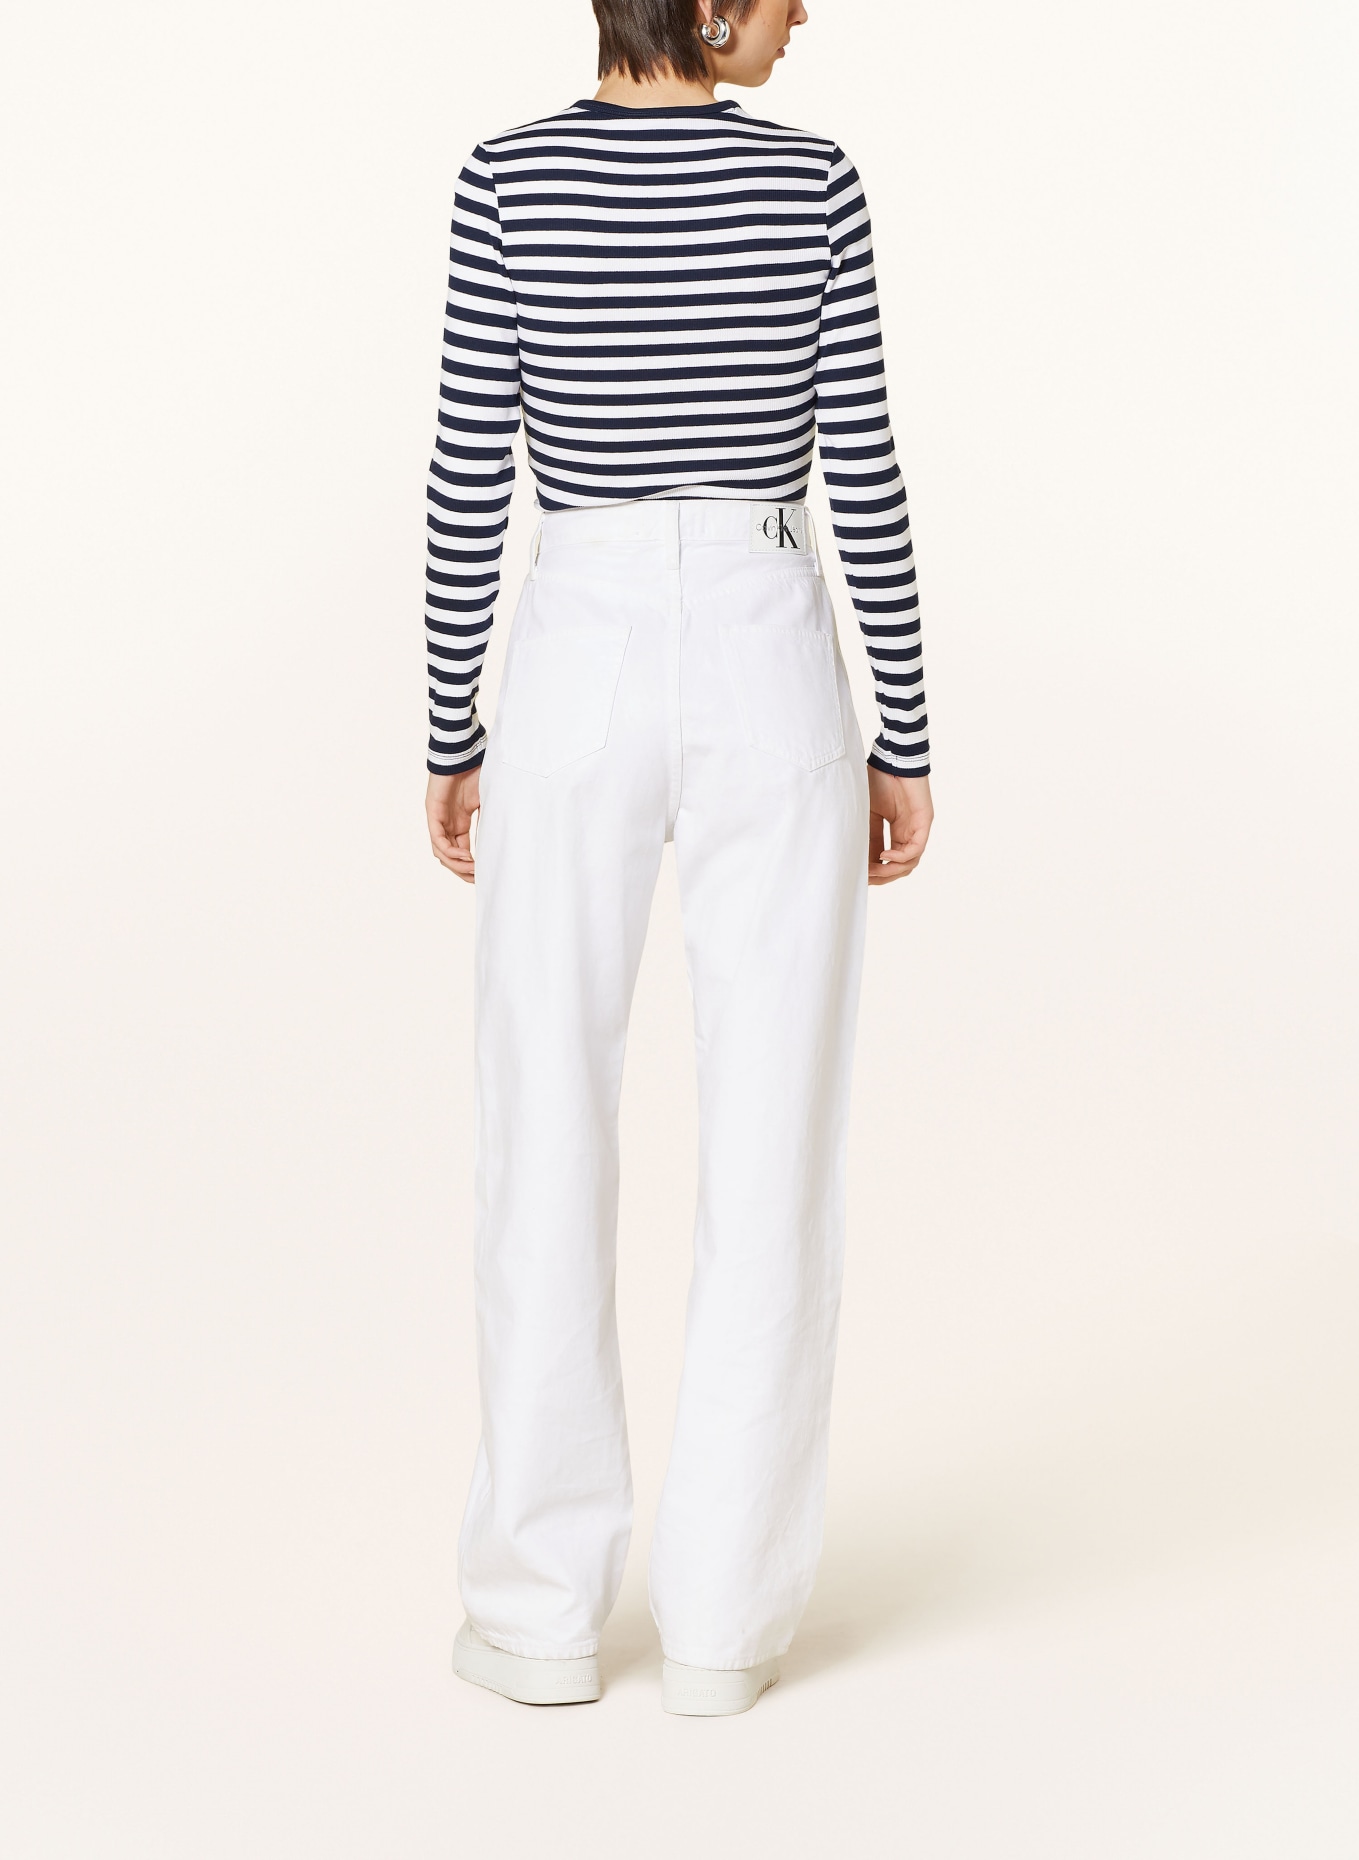 TOMMY JEANS Long sleeve shirt, Color: DARK BLUE/ WHITE (Image 3)